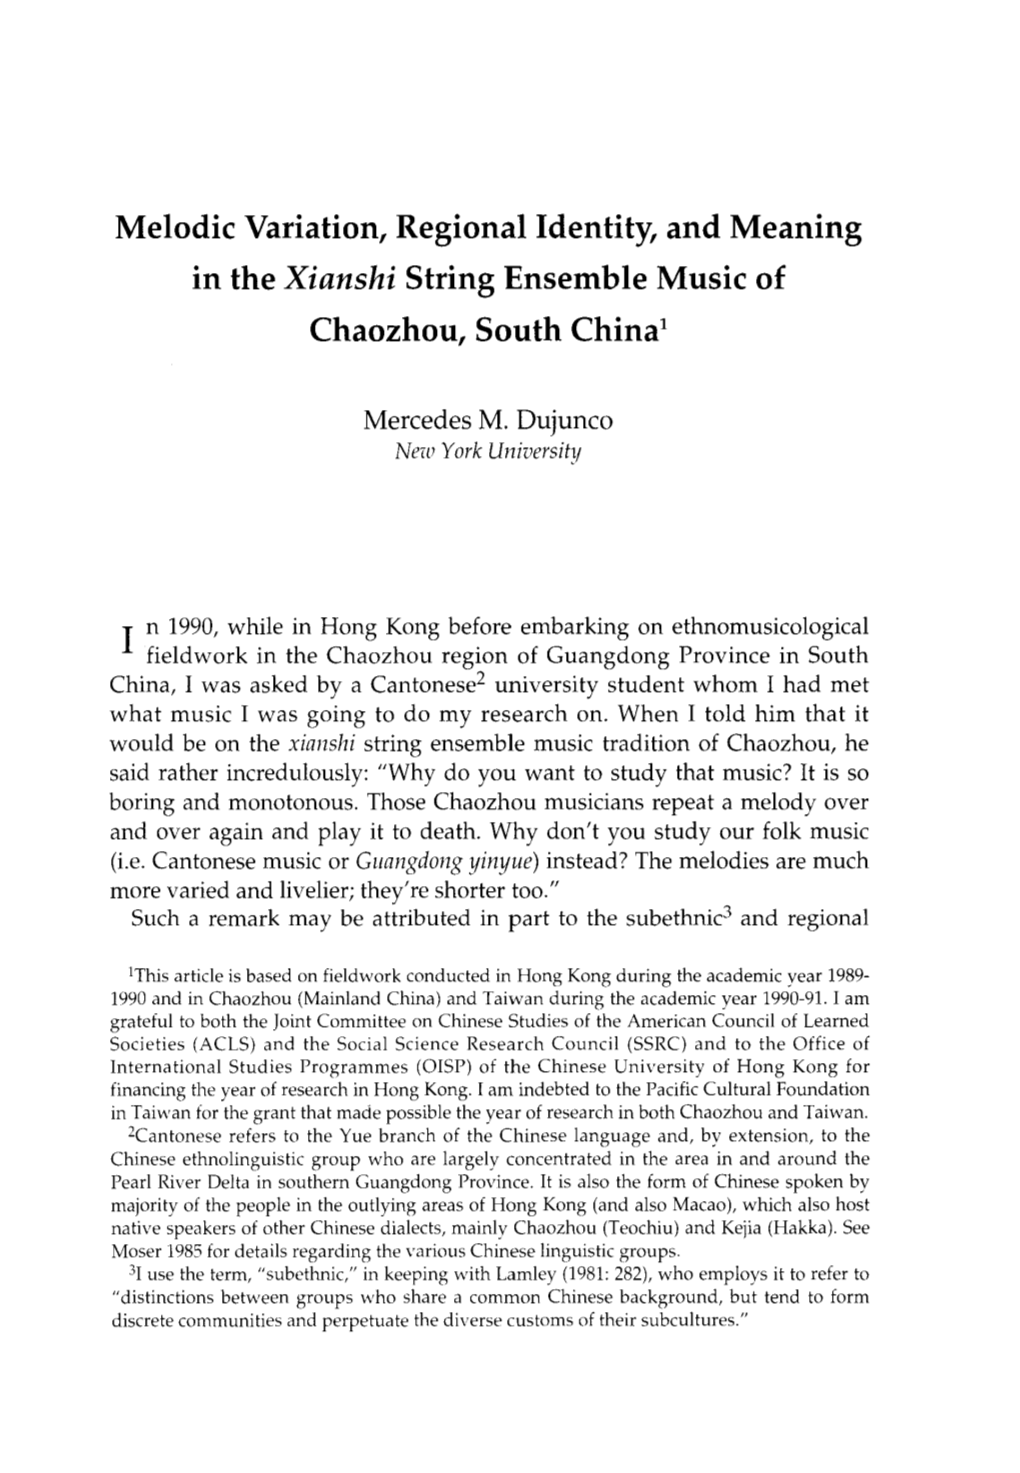 Melodic Variation, Regional Identity, and Meaning in the Xianshi String Ensemble Music of Chaozhou, South Chinal